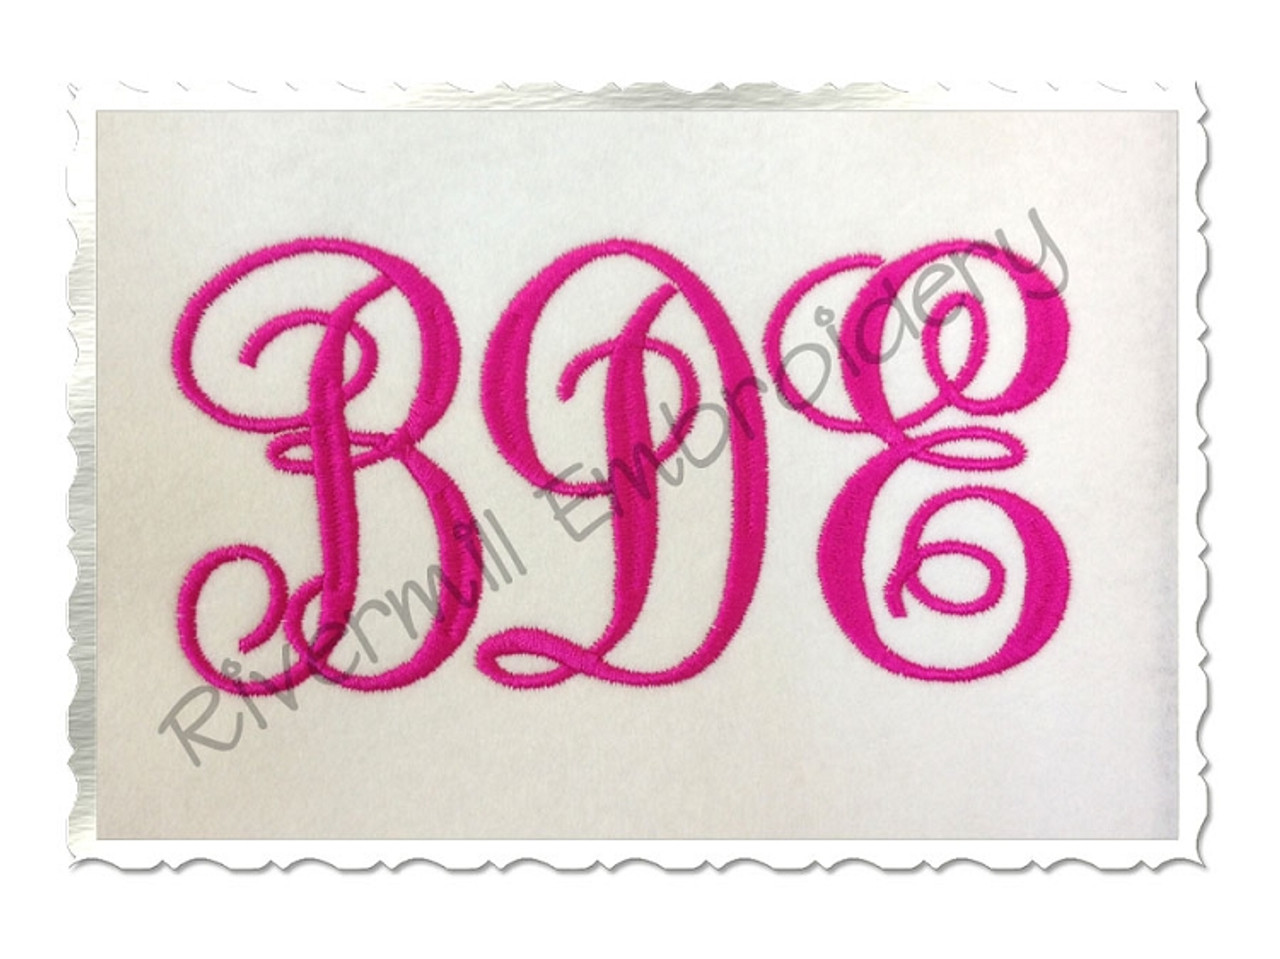 P and S 6 Two-letter Monogram Machine Embroidery Design in 5 Sizes